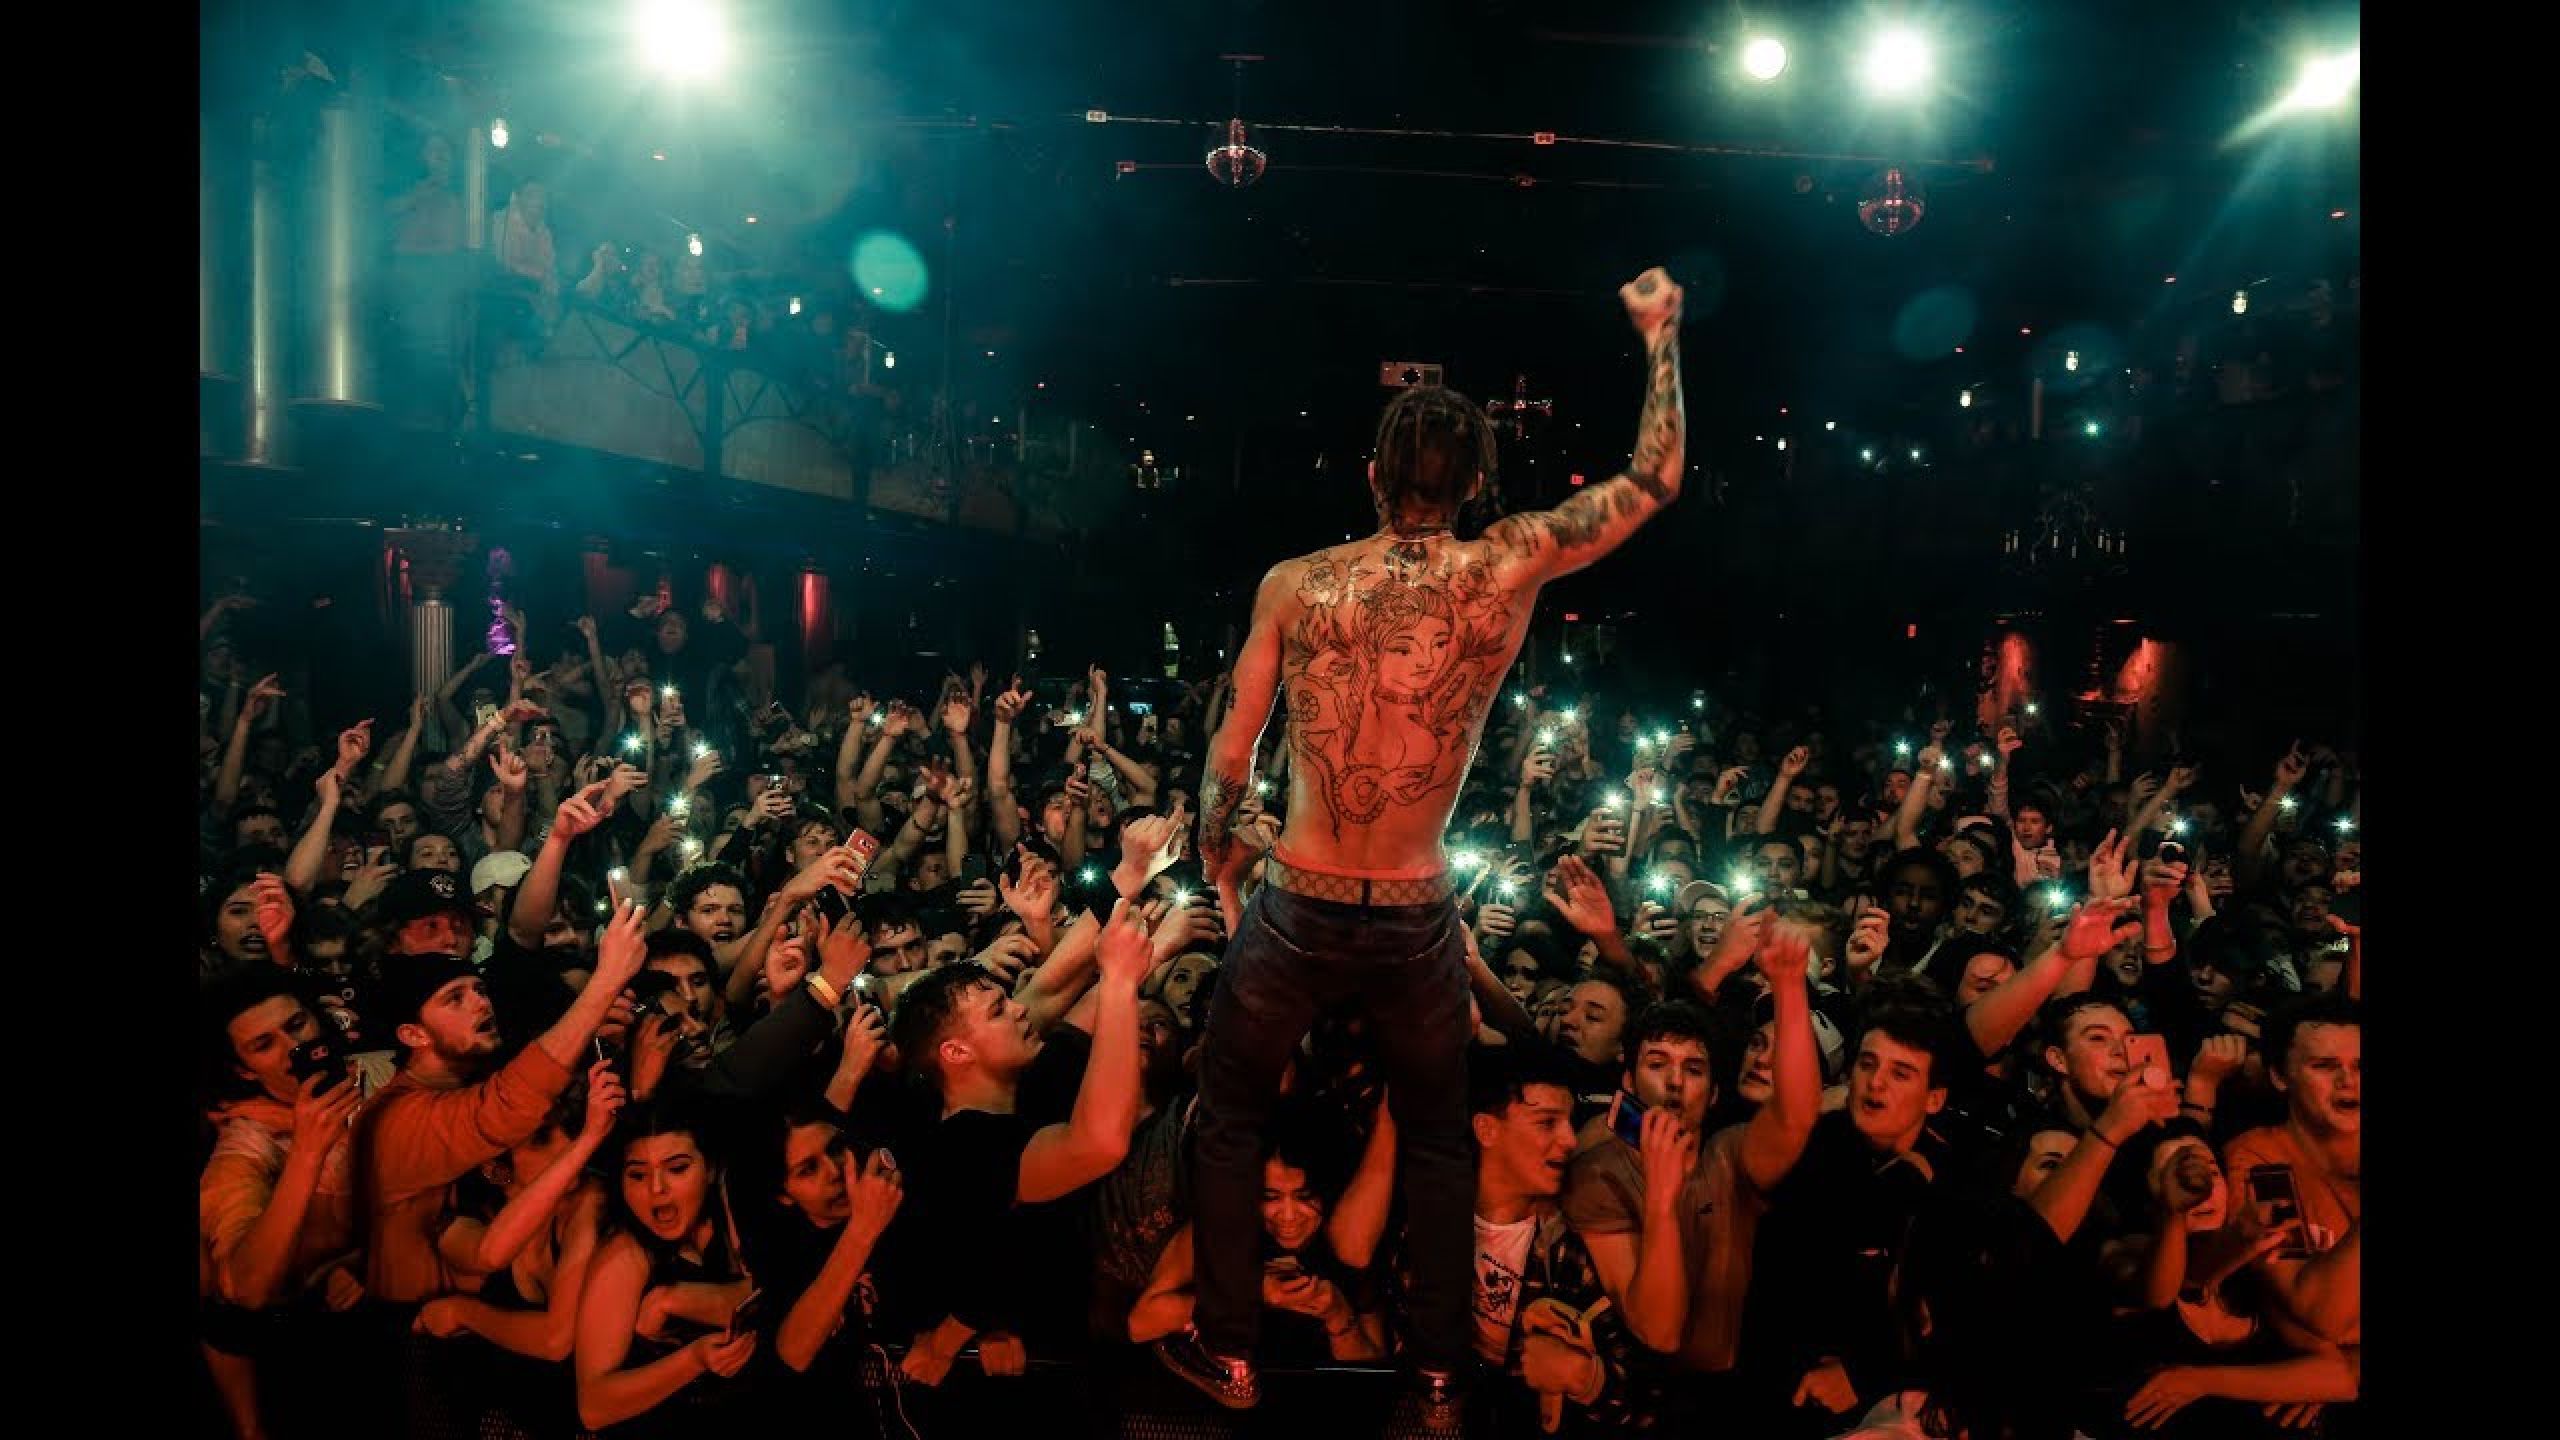 Lil Skies Life of a Dark Rose Tour (Episode 1) Clothes, Outfits